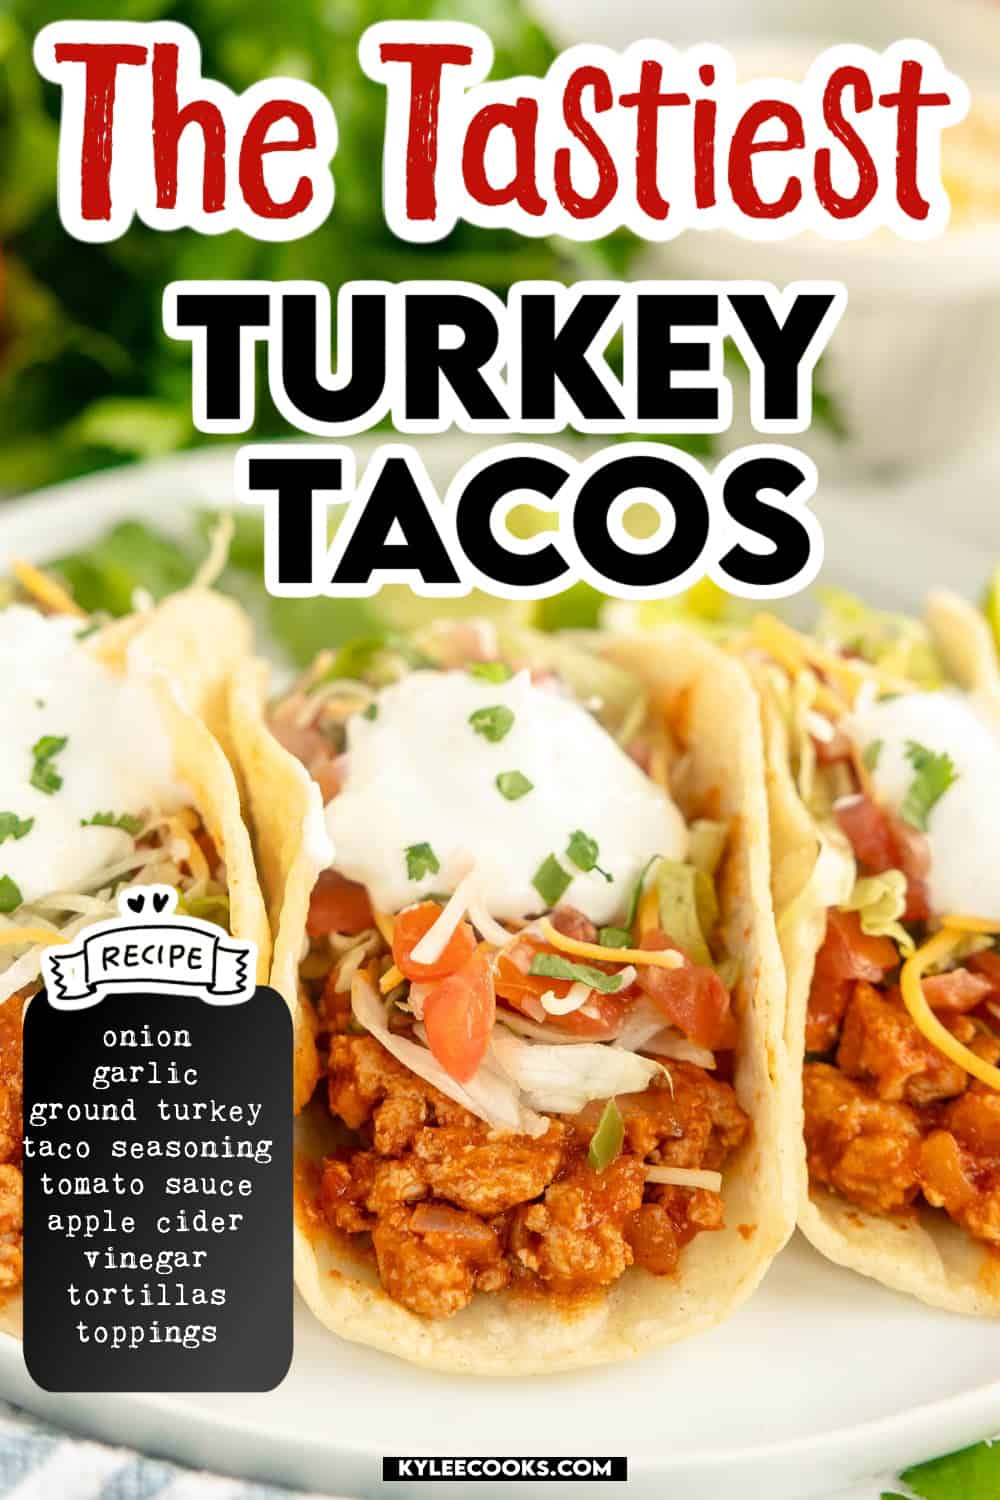 3 turkey tacos on a plate with recipe name and ingredients overlaid in text.